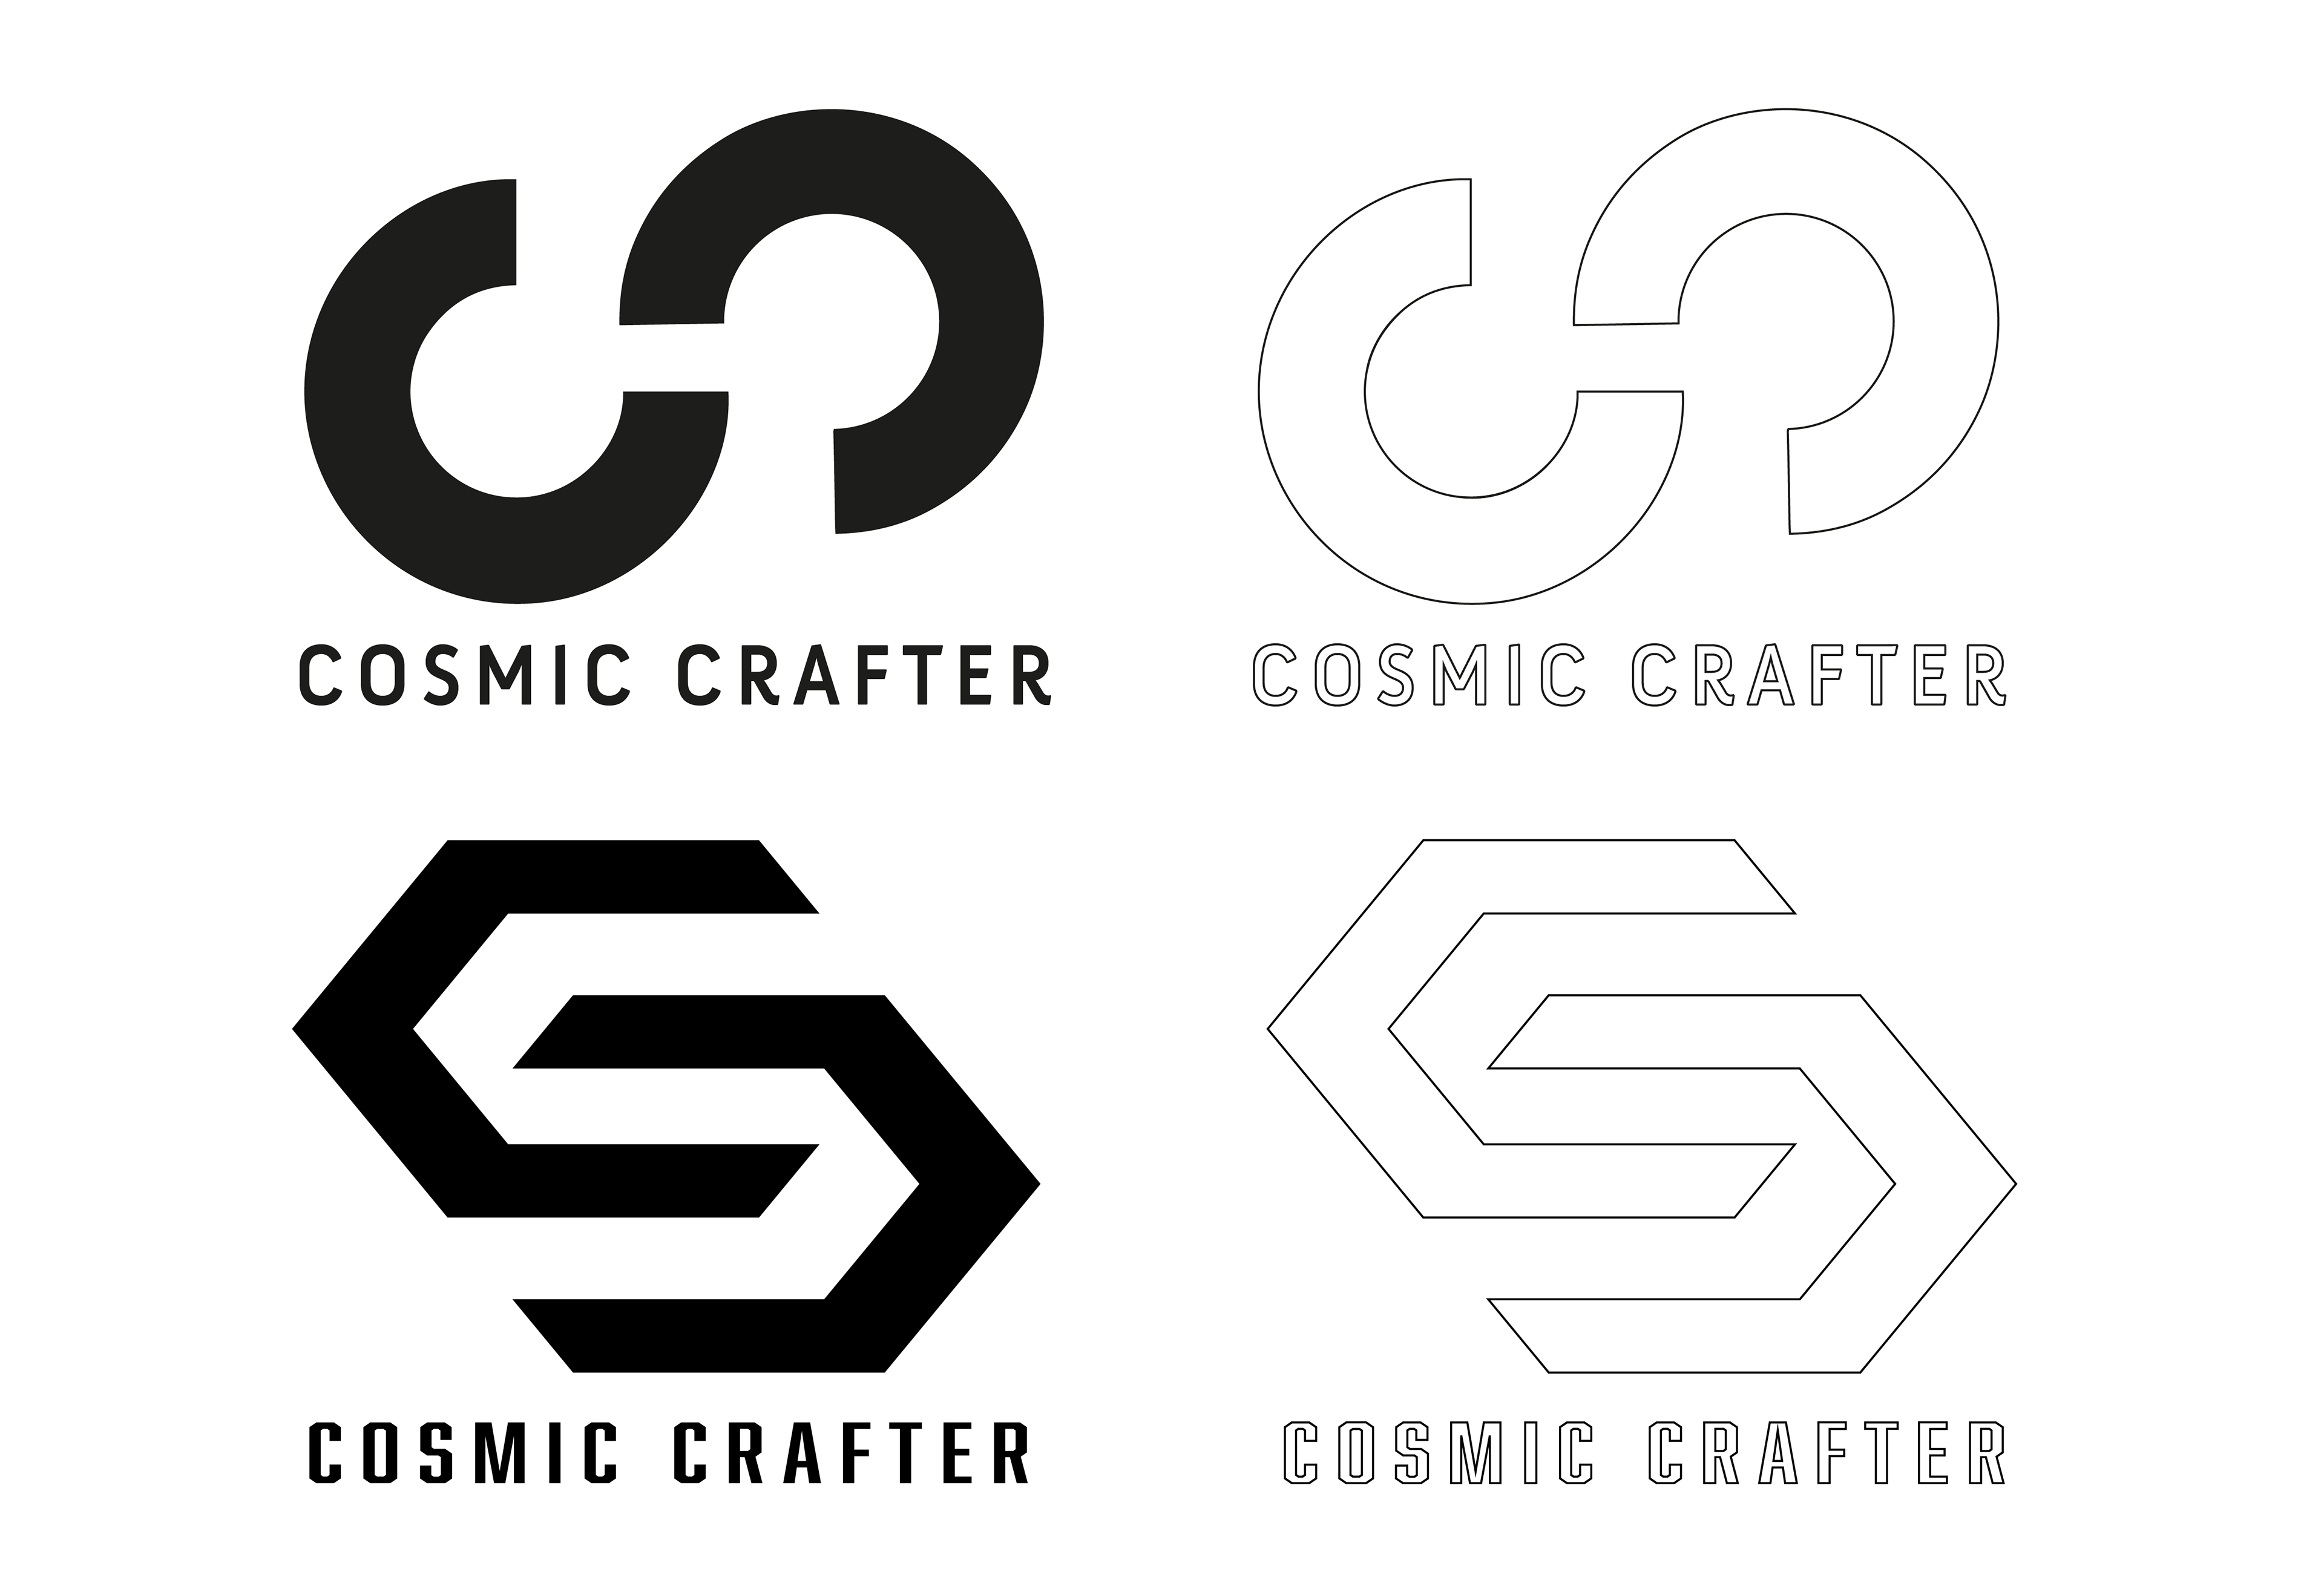 Crafter Logo - Cosmic Crafter Logo on Behance